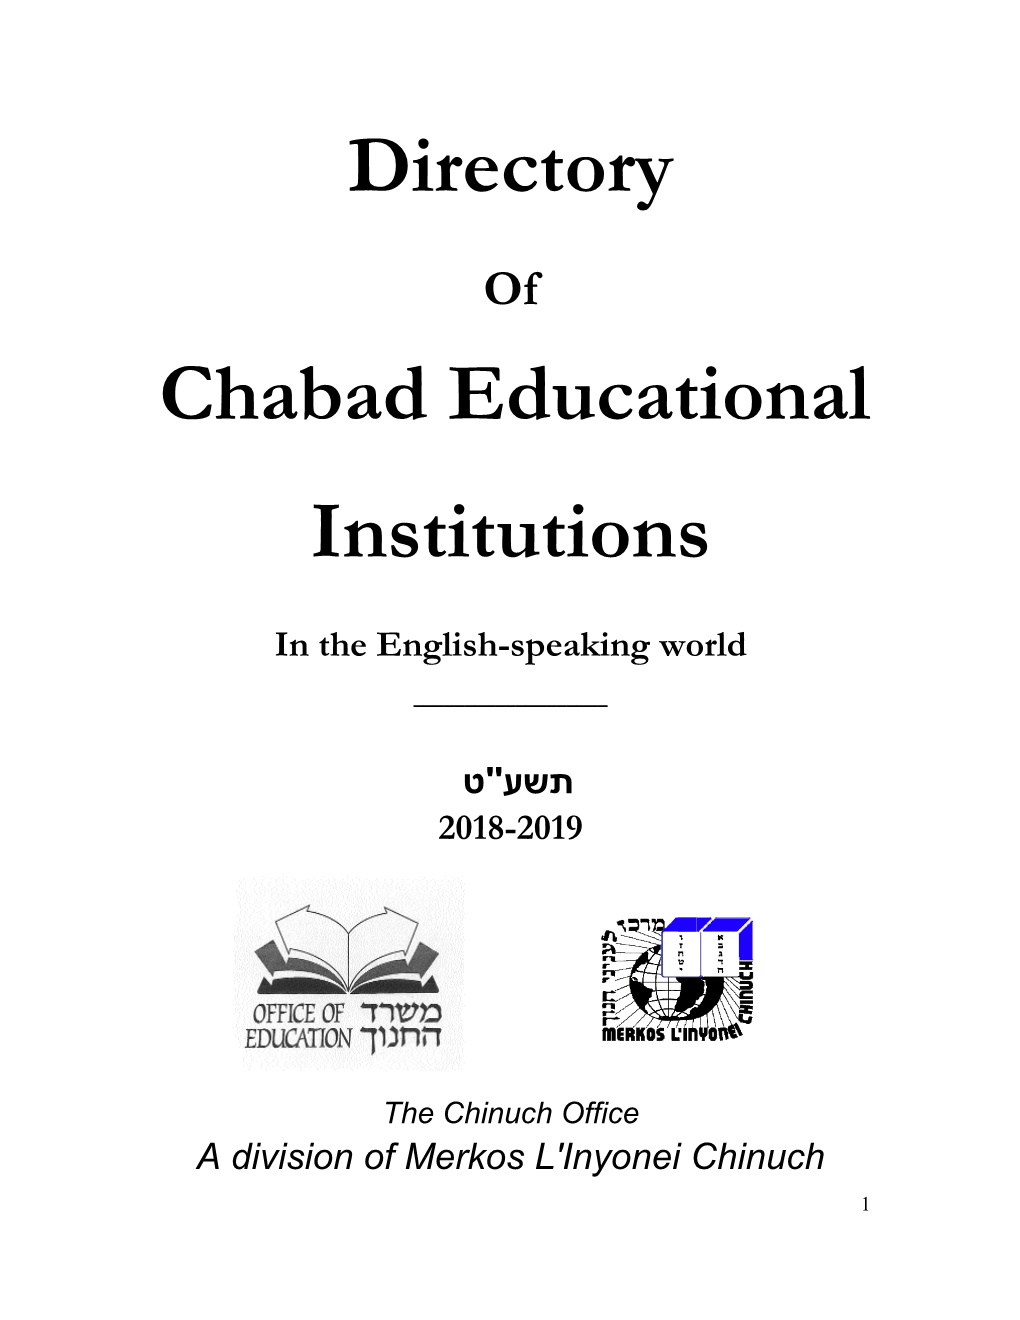 Directory Chabad Educational Institutions